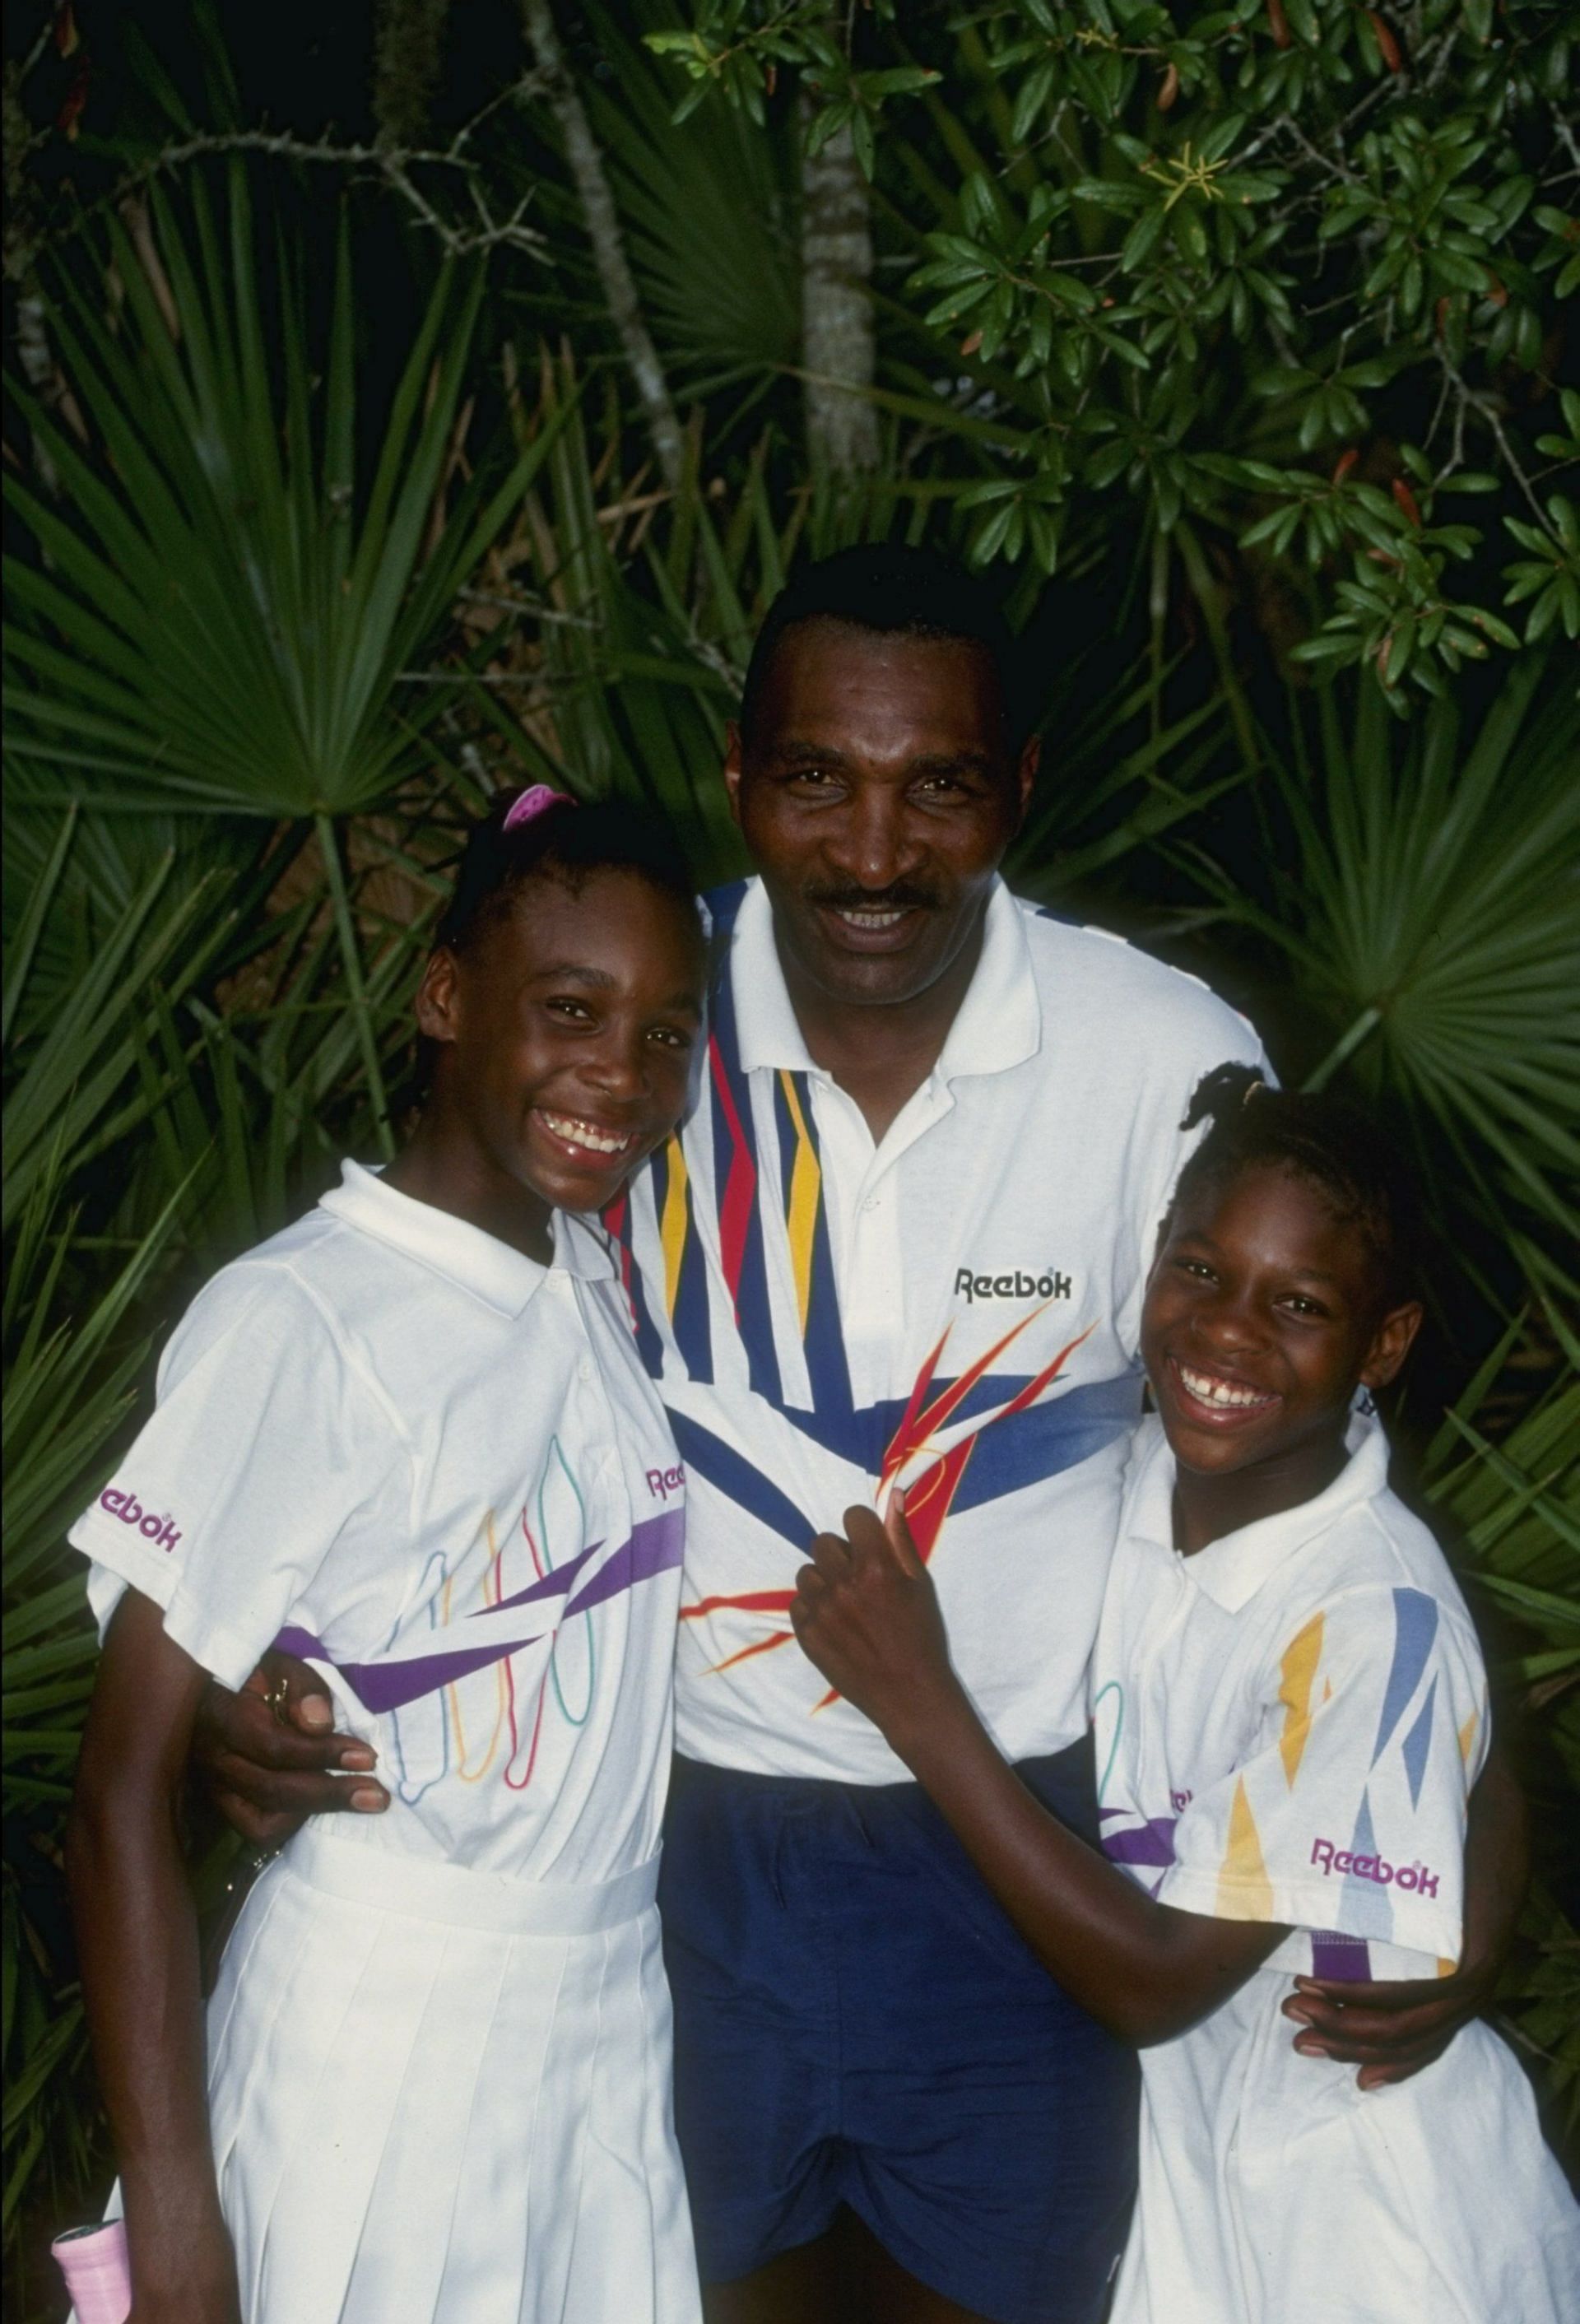 Serena and Venus Williams with father Richard in 1992.